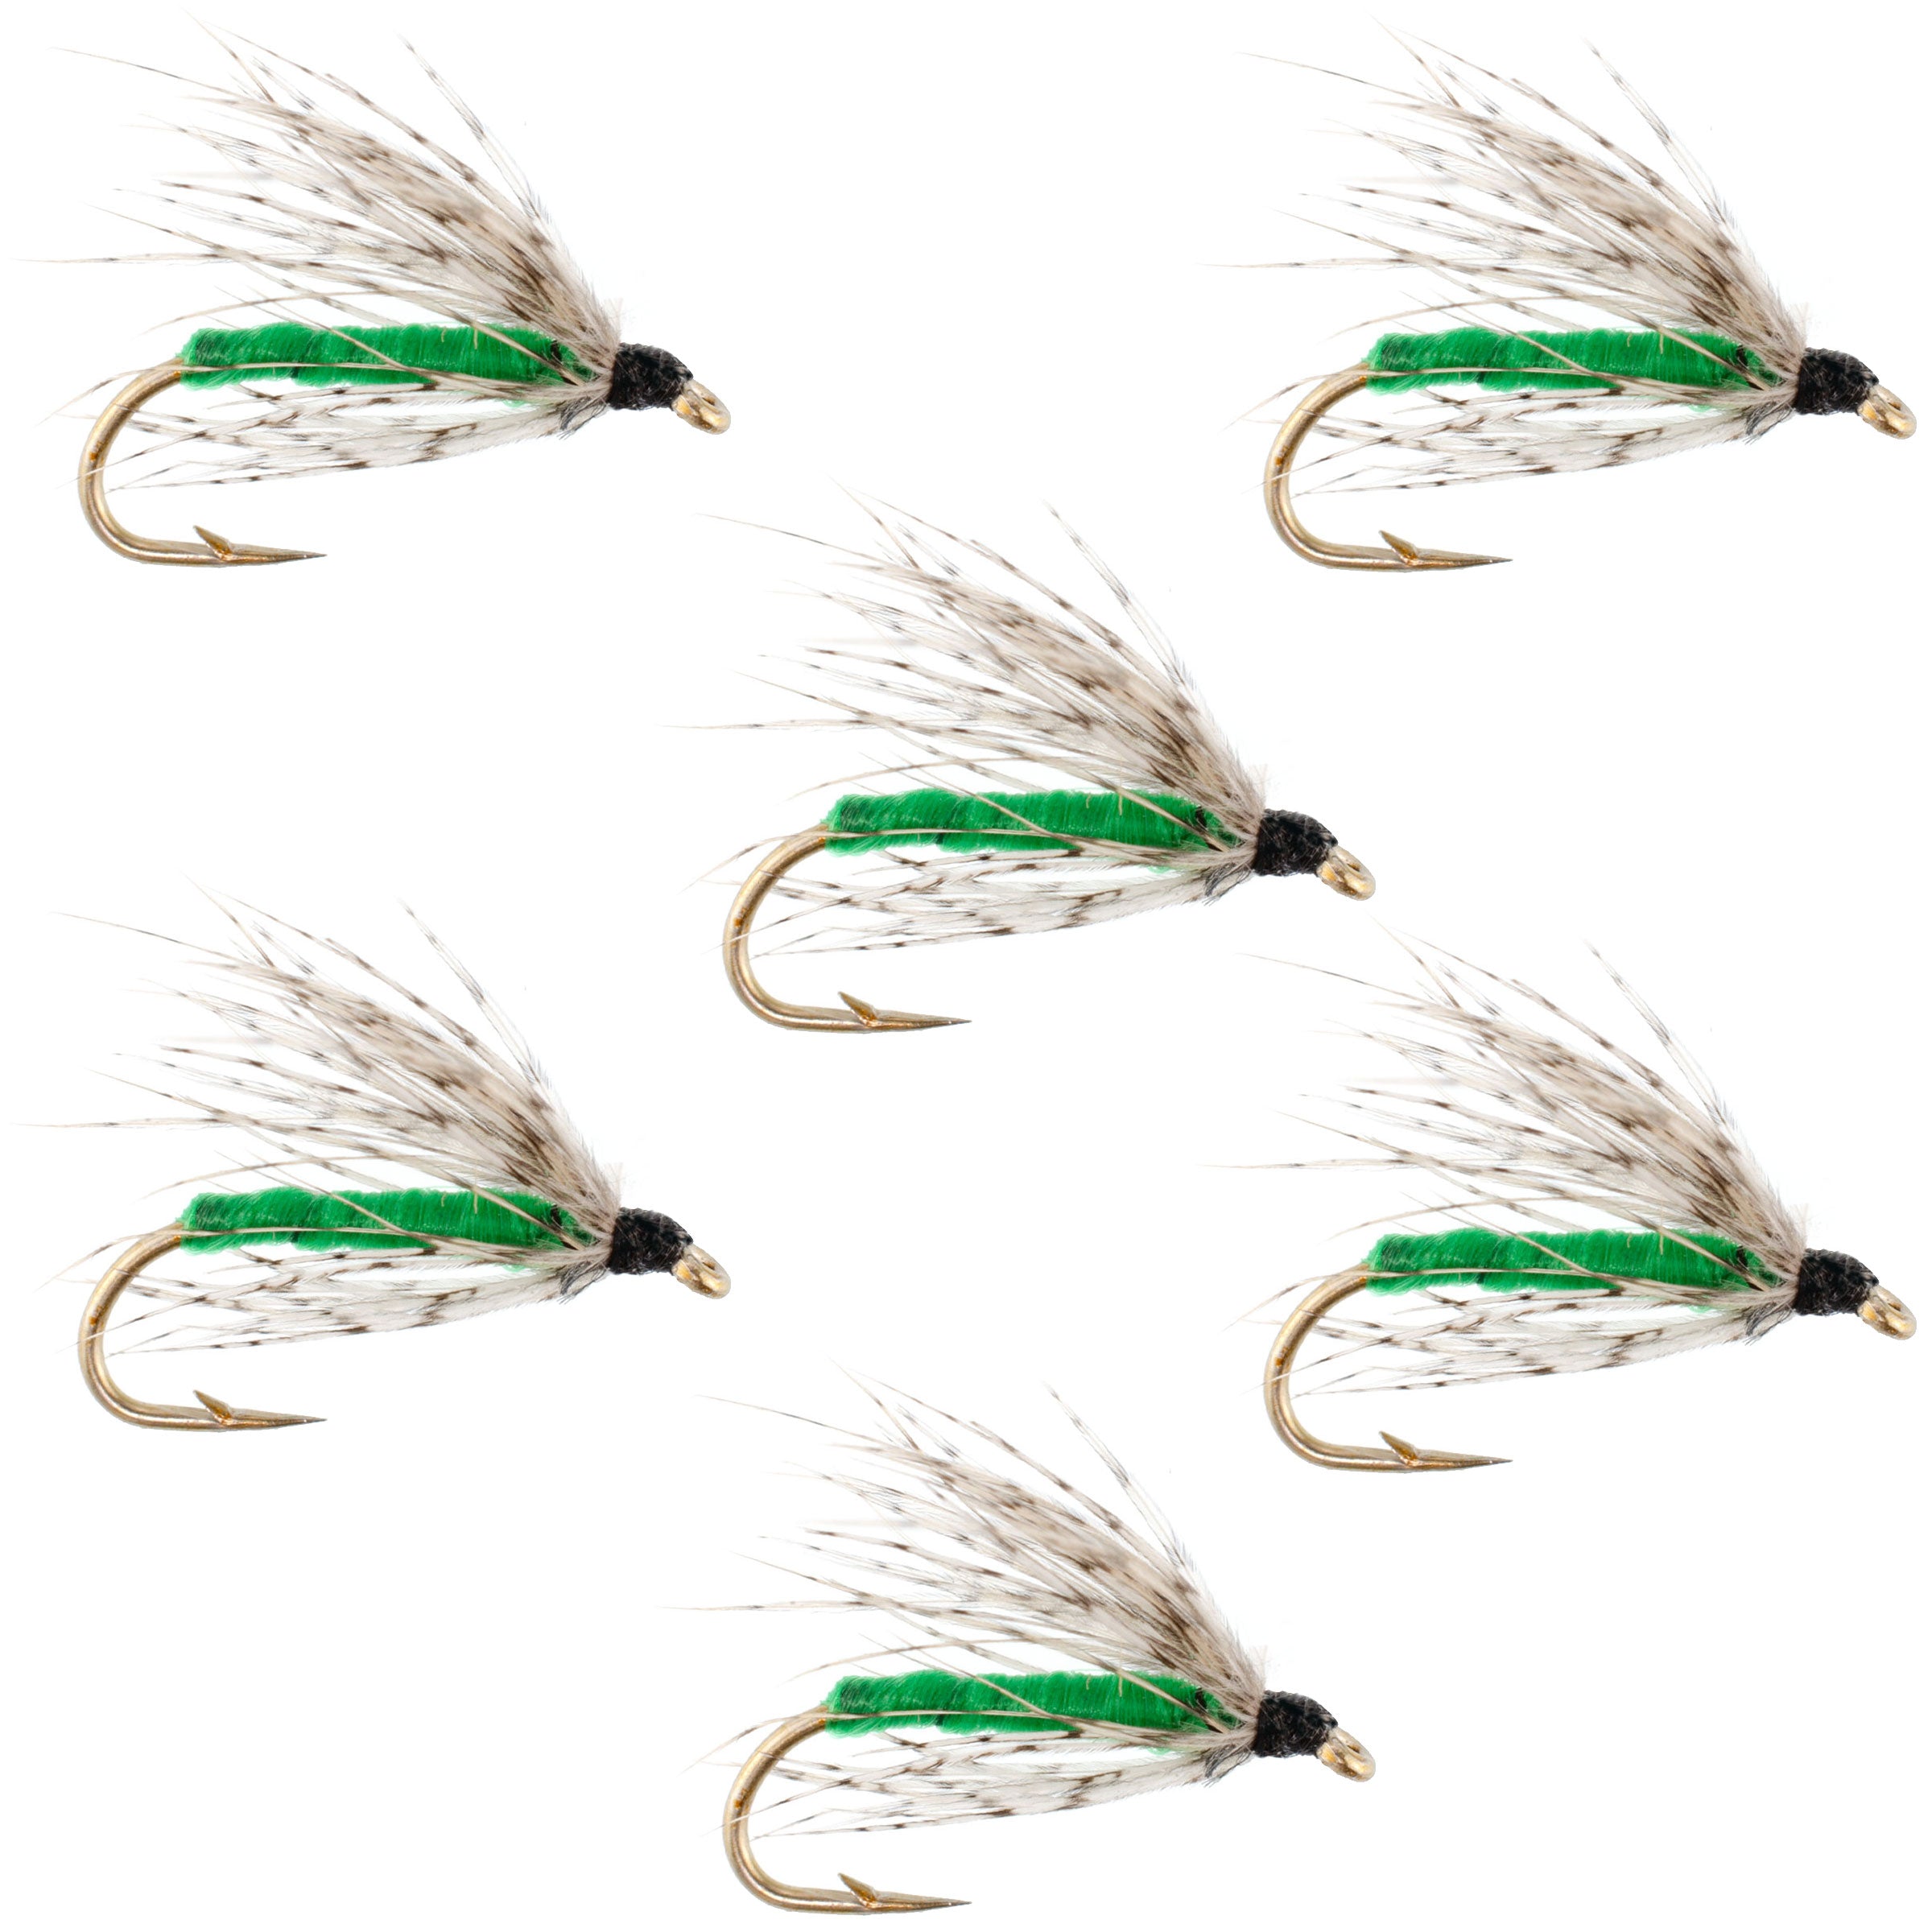 Soft Hackle Partridge and Green Fly Fishing Wet Flies - 6 Flies Hook Size 14